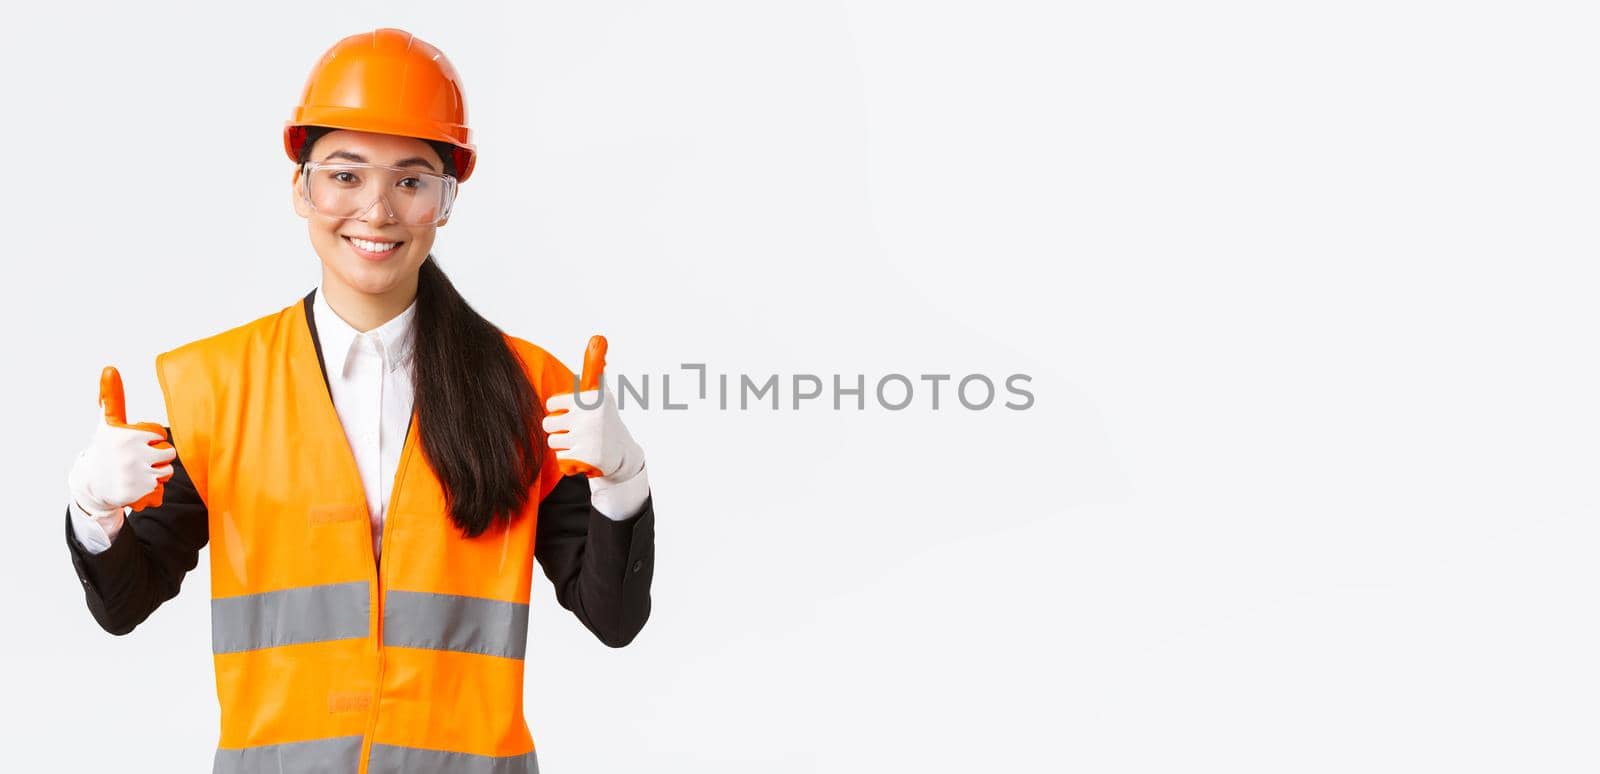 Satisfied smiling female asian chief construction engineer giving permission to enter building or entertprise after wearing safety clothing, glasses gloves and helmet, showing thumbs-up in approval.